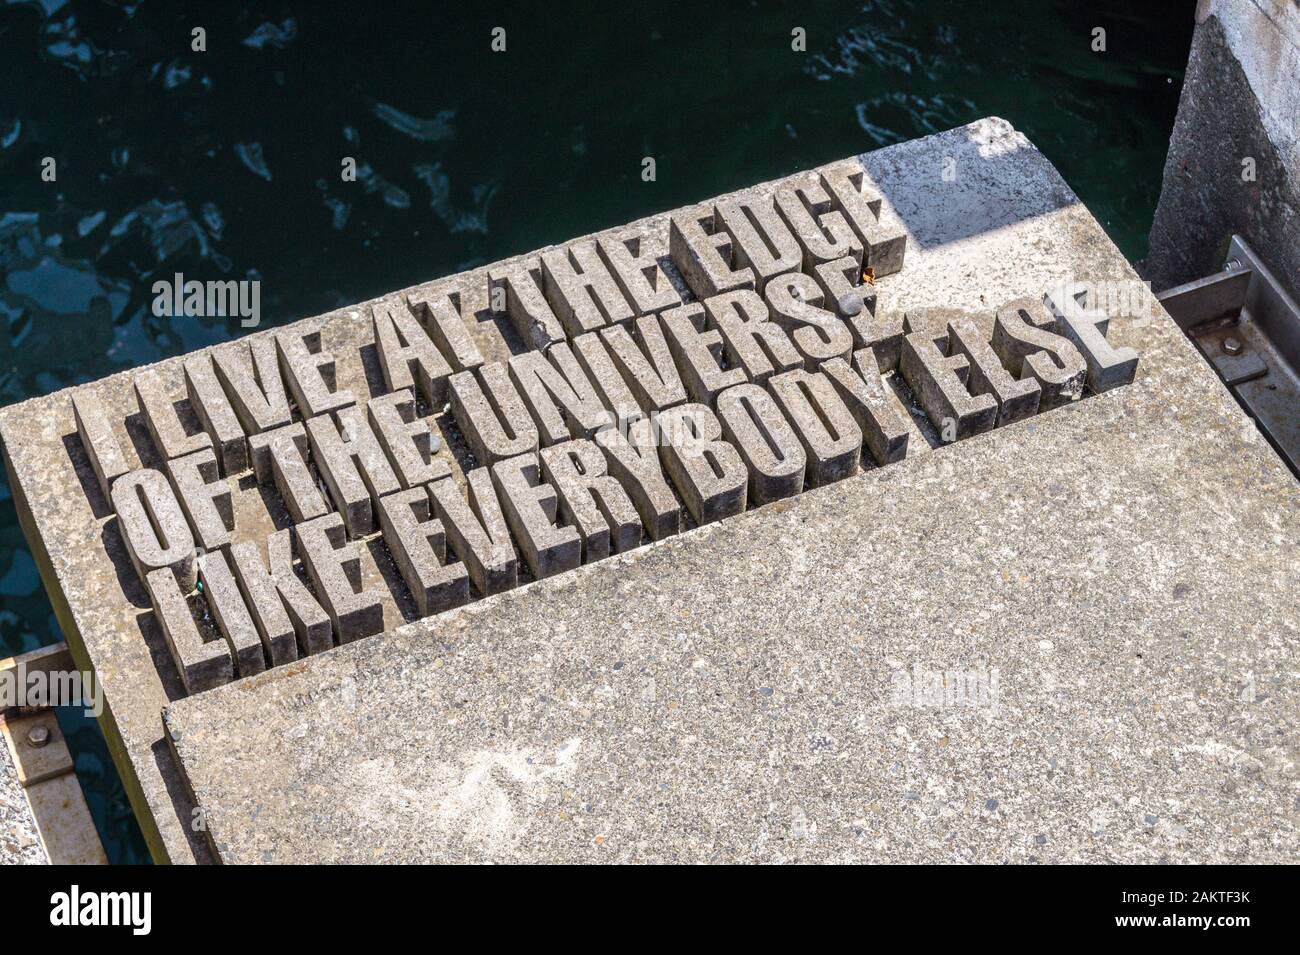 'I live at the edge of the universe, like everybody else' quotation sculpture by Catherine Griffiths, Taranaki Street Wharf, Wellington, New Zealand Stock Photo